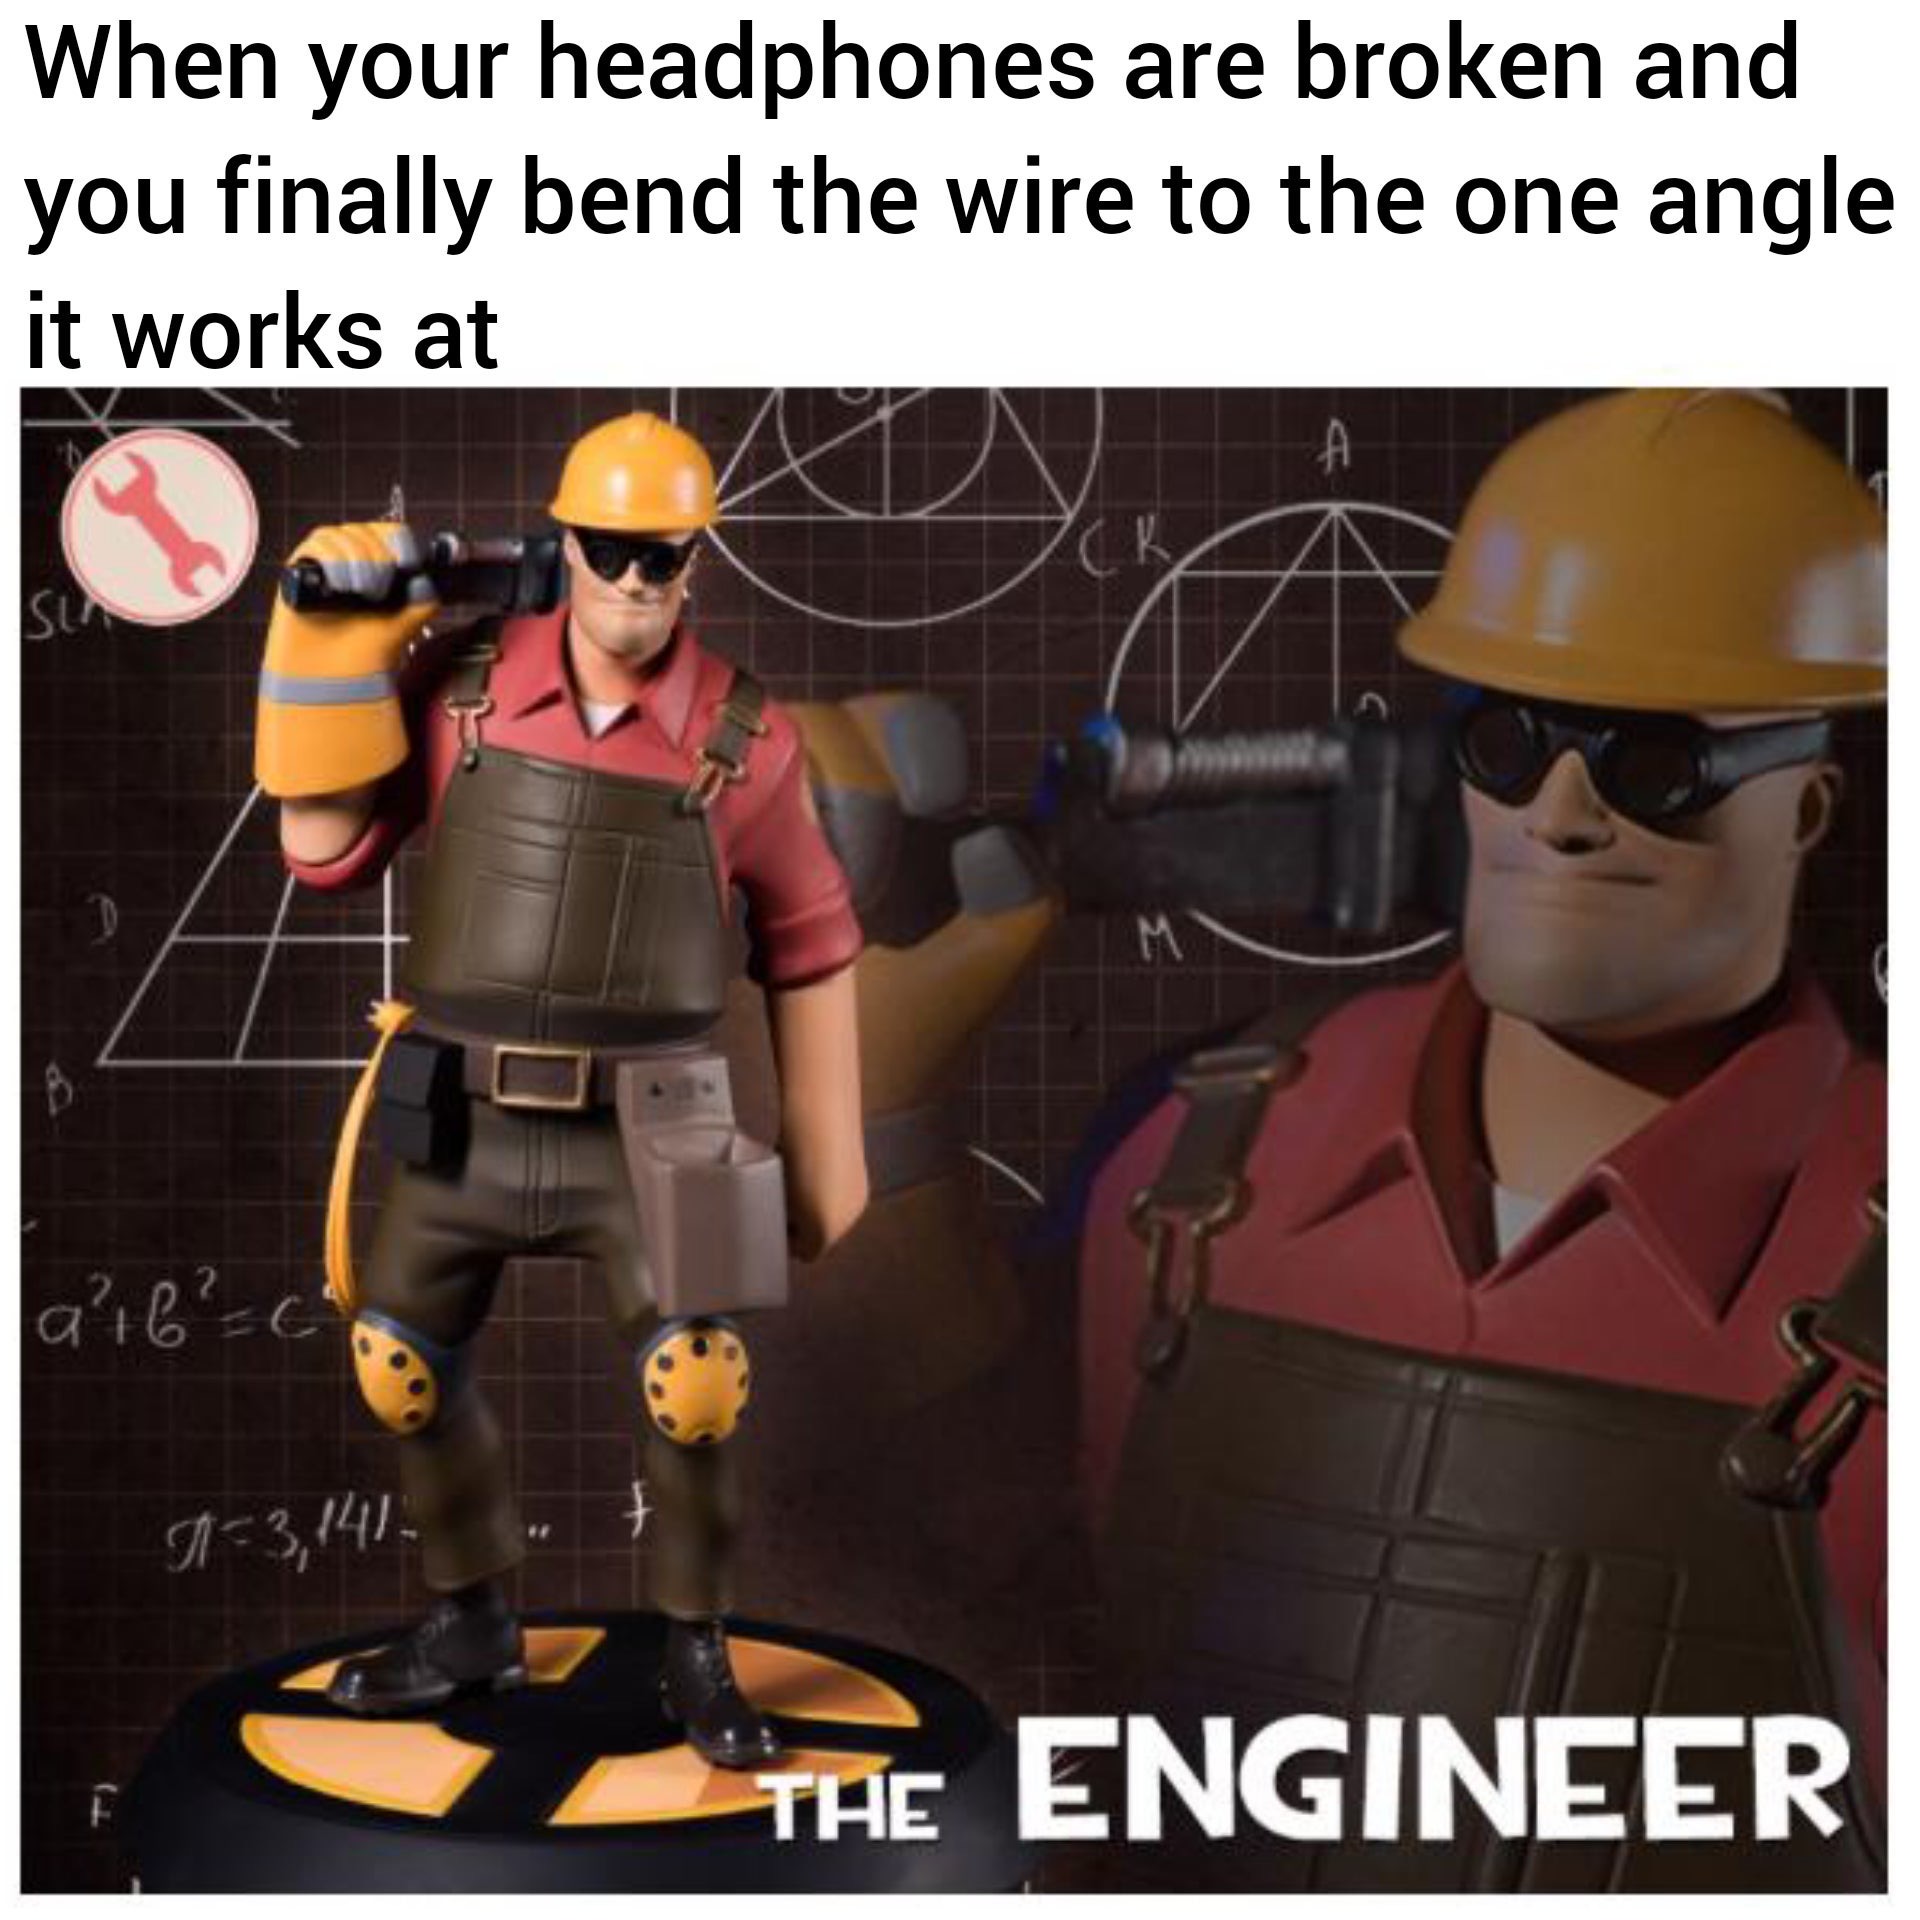 funny memes - engineer meme - When your headphones are broken and you finally bend the wire to the one angle it works at aie 23,141. The Engineer